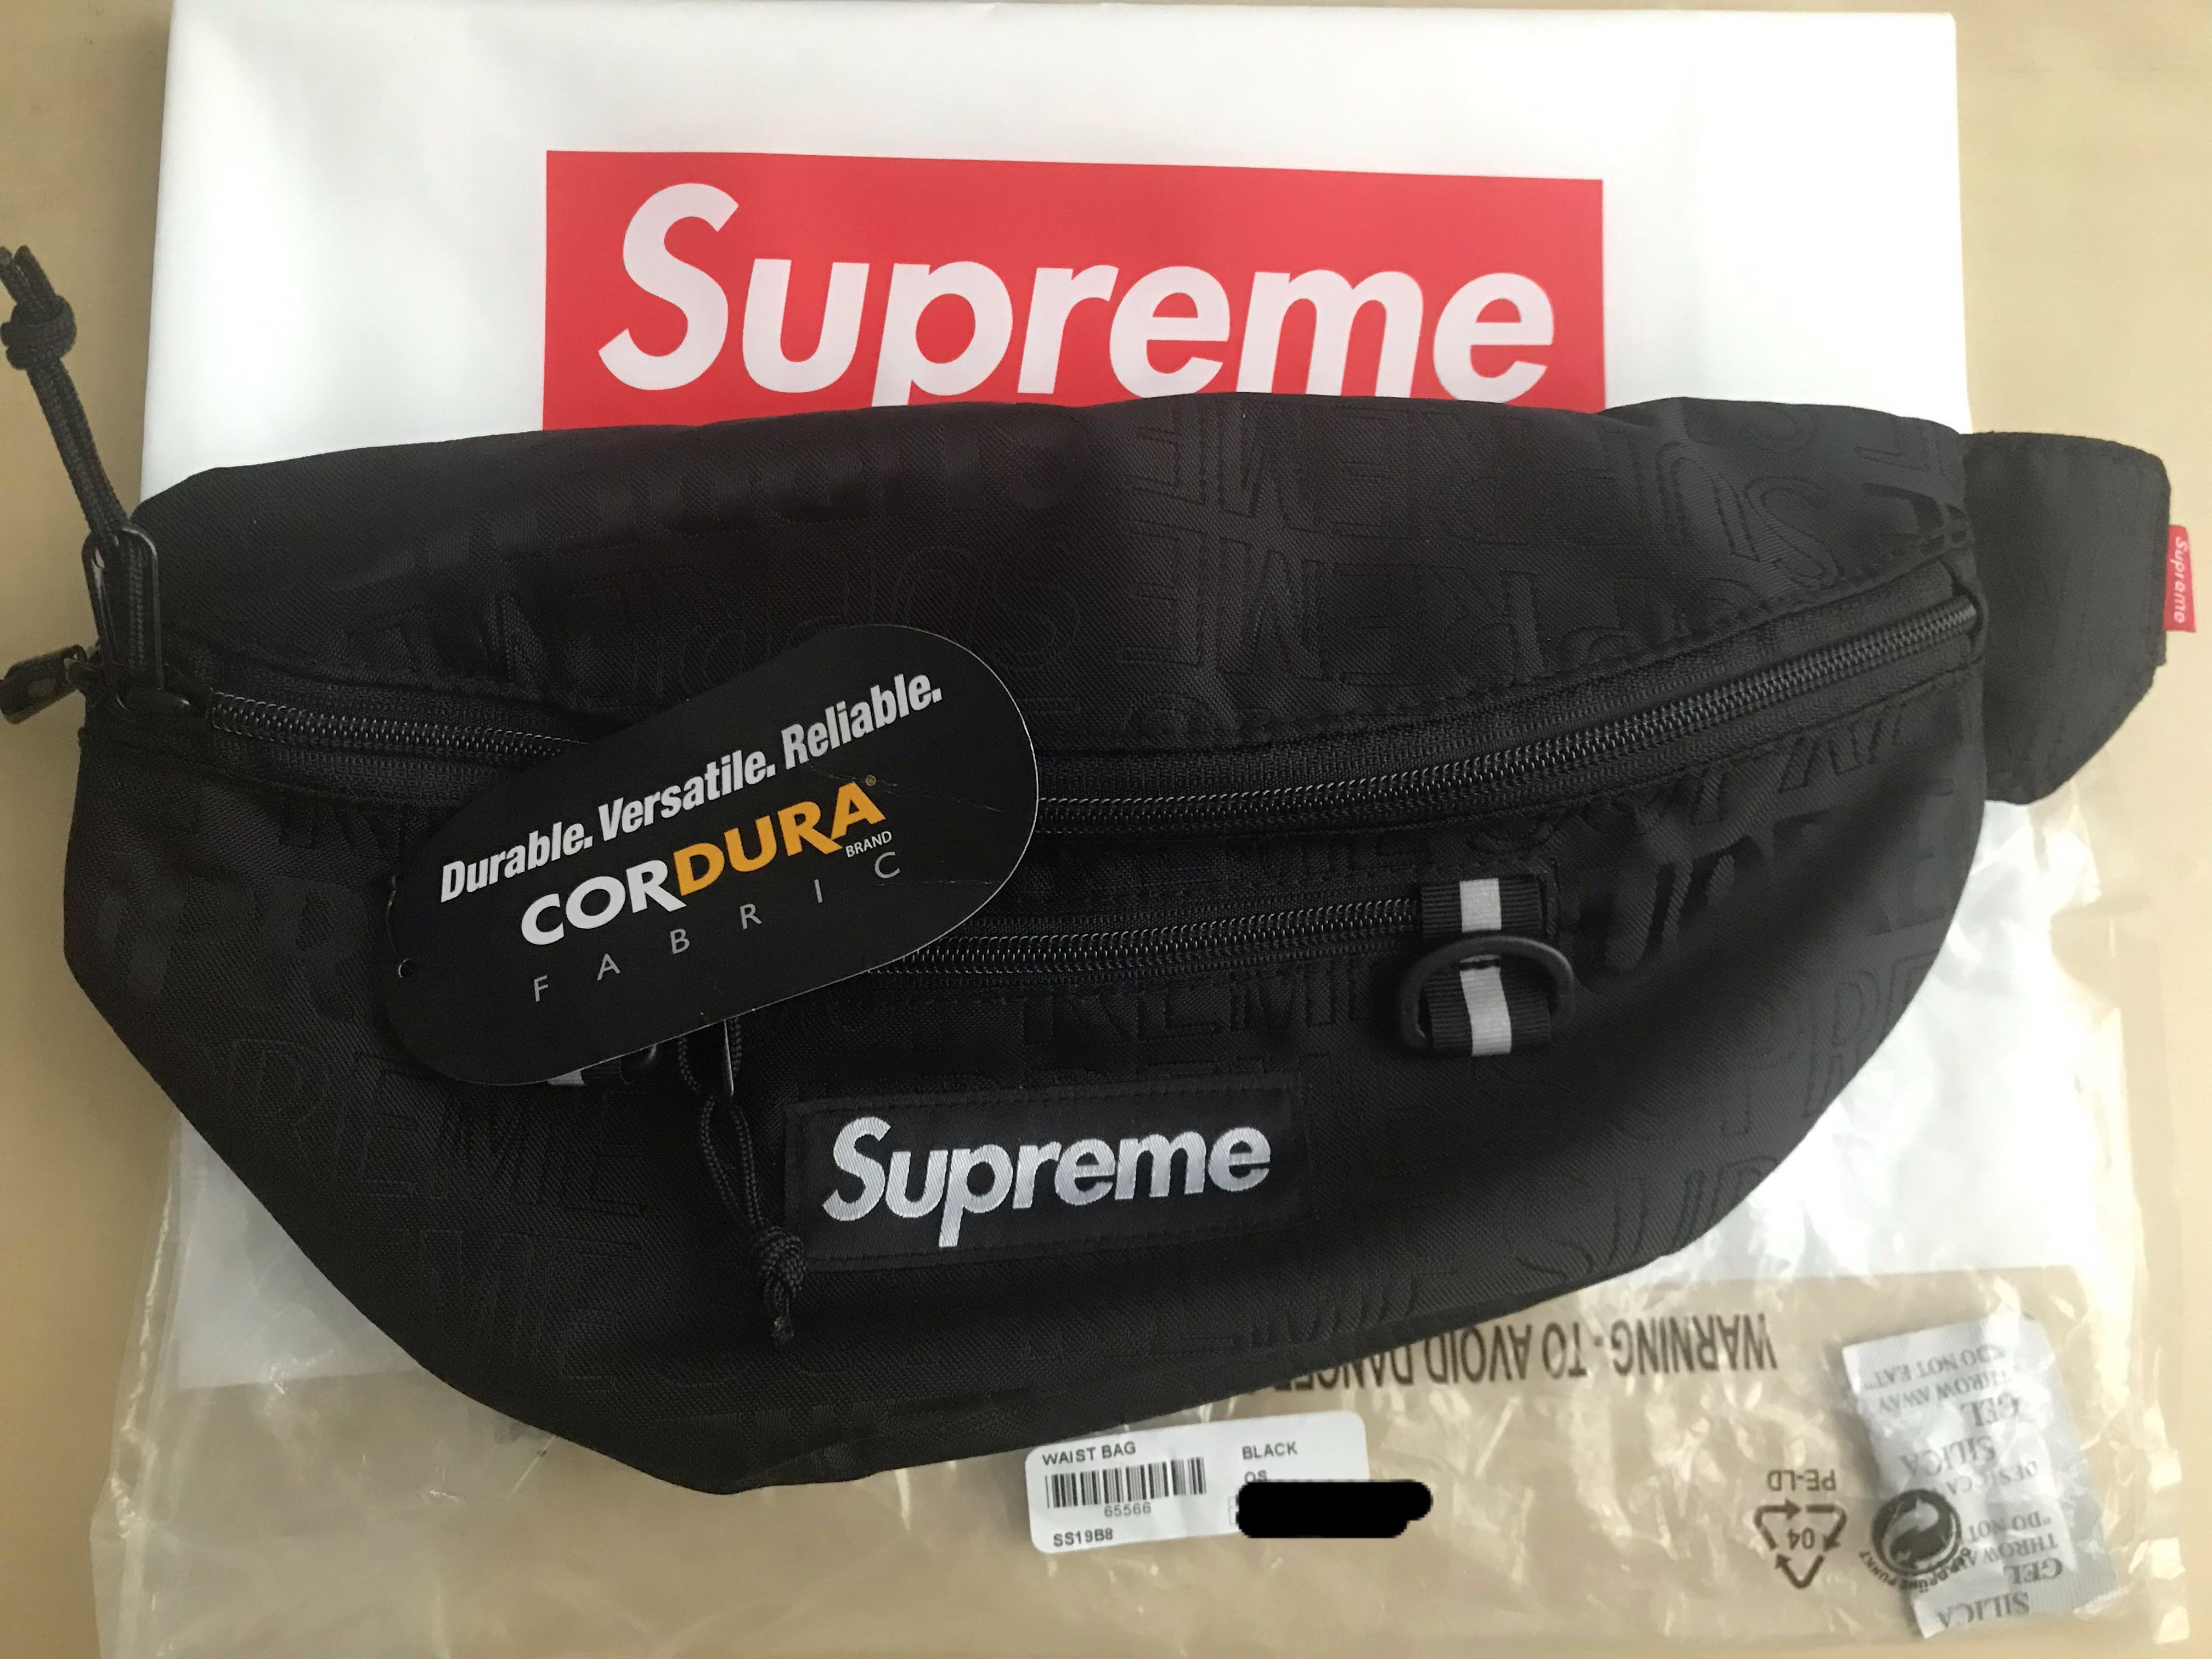 Supreme Louis Vuitton Bum Bag Fanny Pack for Sale in Costa Mesa